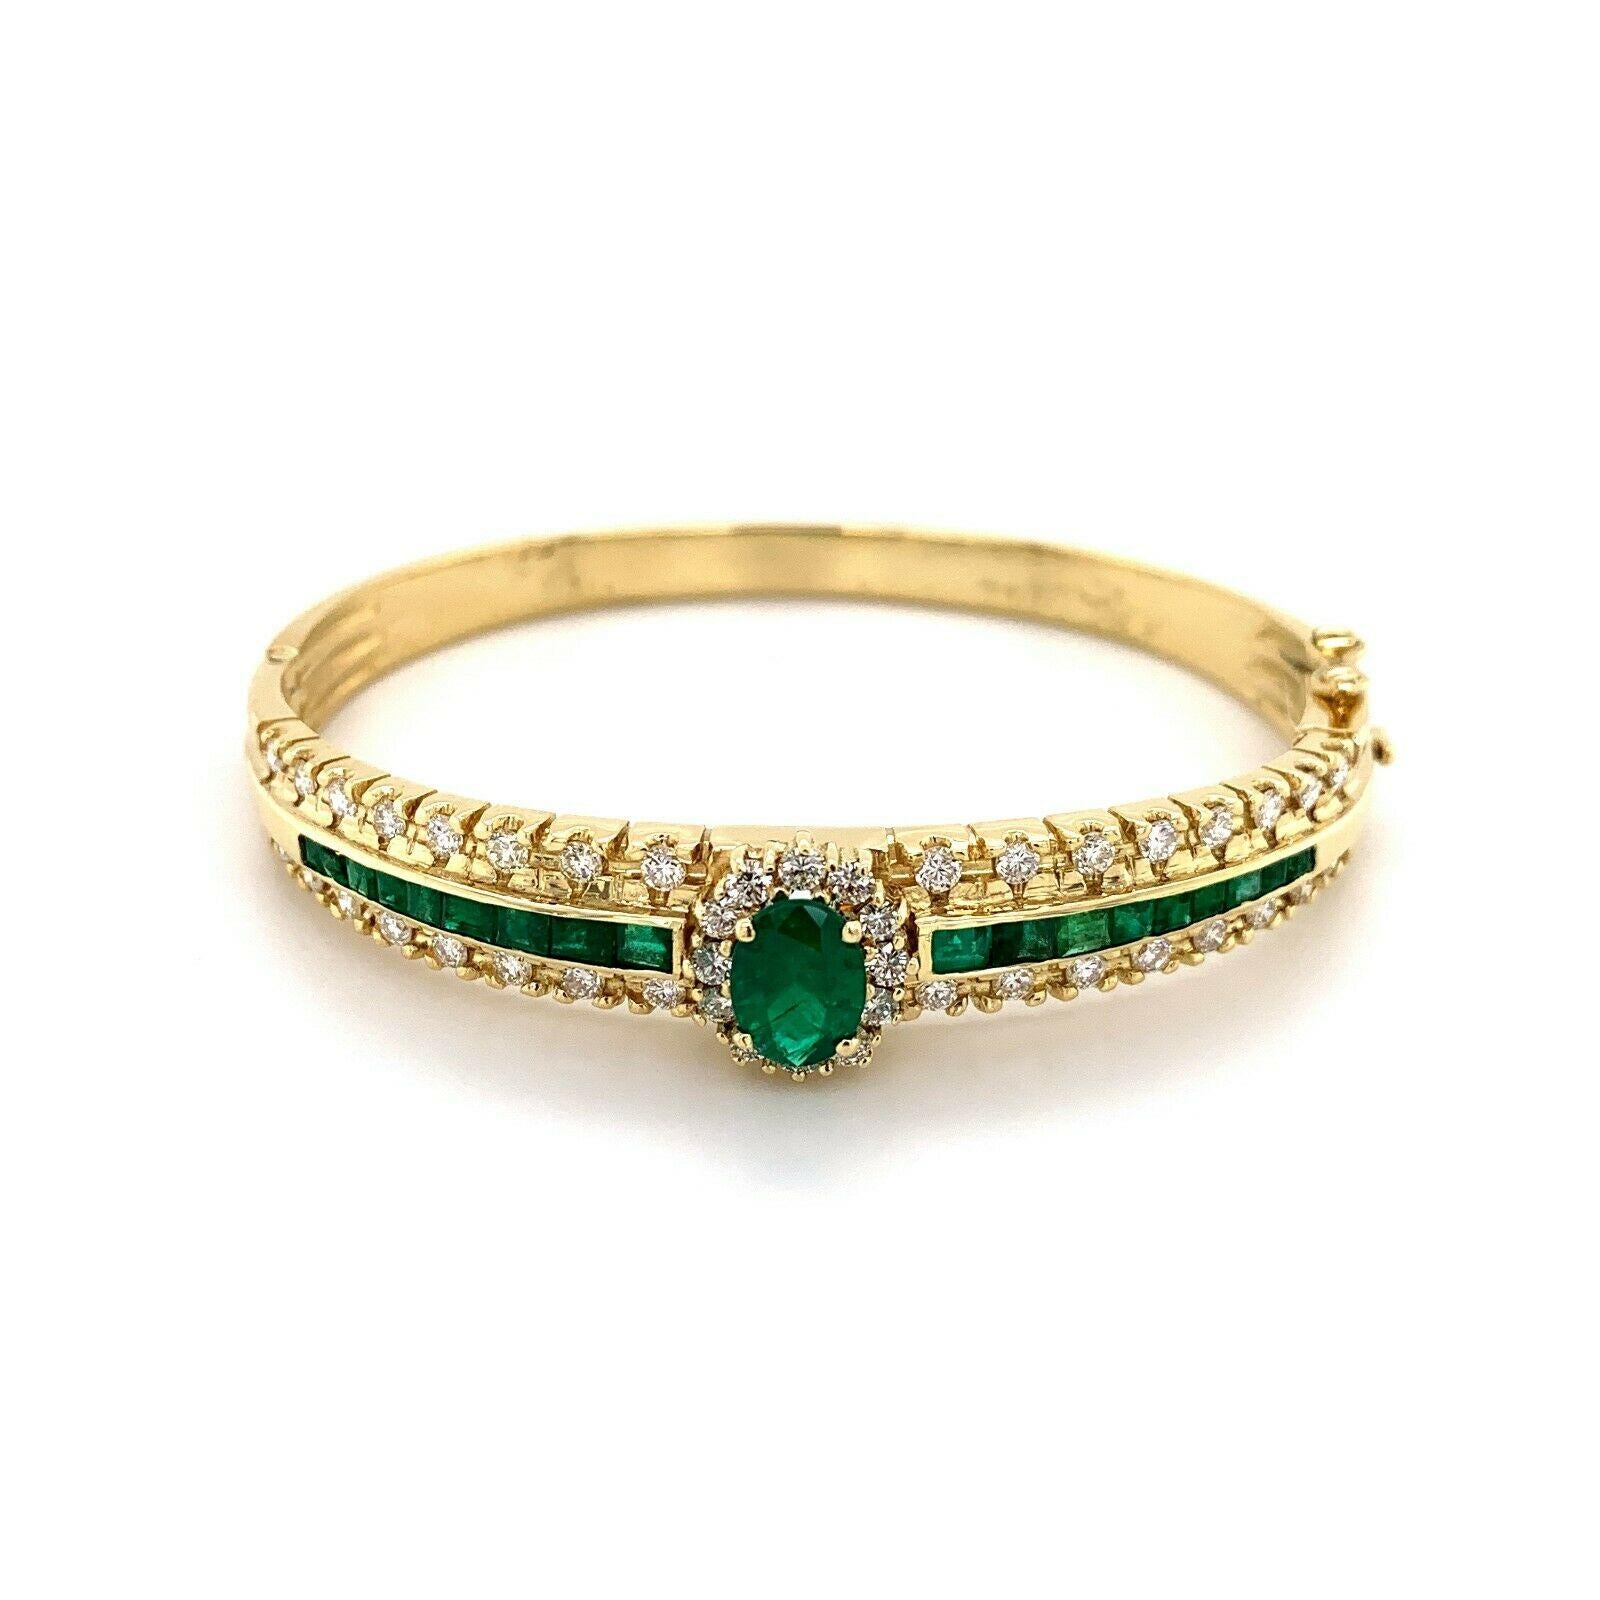 Emerald Colombian & Diamond 3.45ct T.W. Estate Bracelet Value Est: $ 14750+TAX

Main Stone: Natural Green Emerald Carat Weight:  1.95 CT T.W.

Shape: Oval & Princess Cuts

Diamond Weight: 1.50 CT T.W.

GEM TYPE: 100% Very Fine Quality Natural